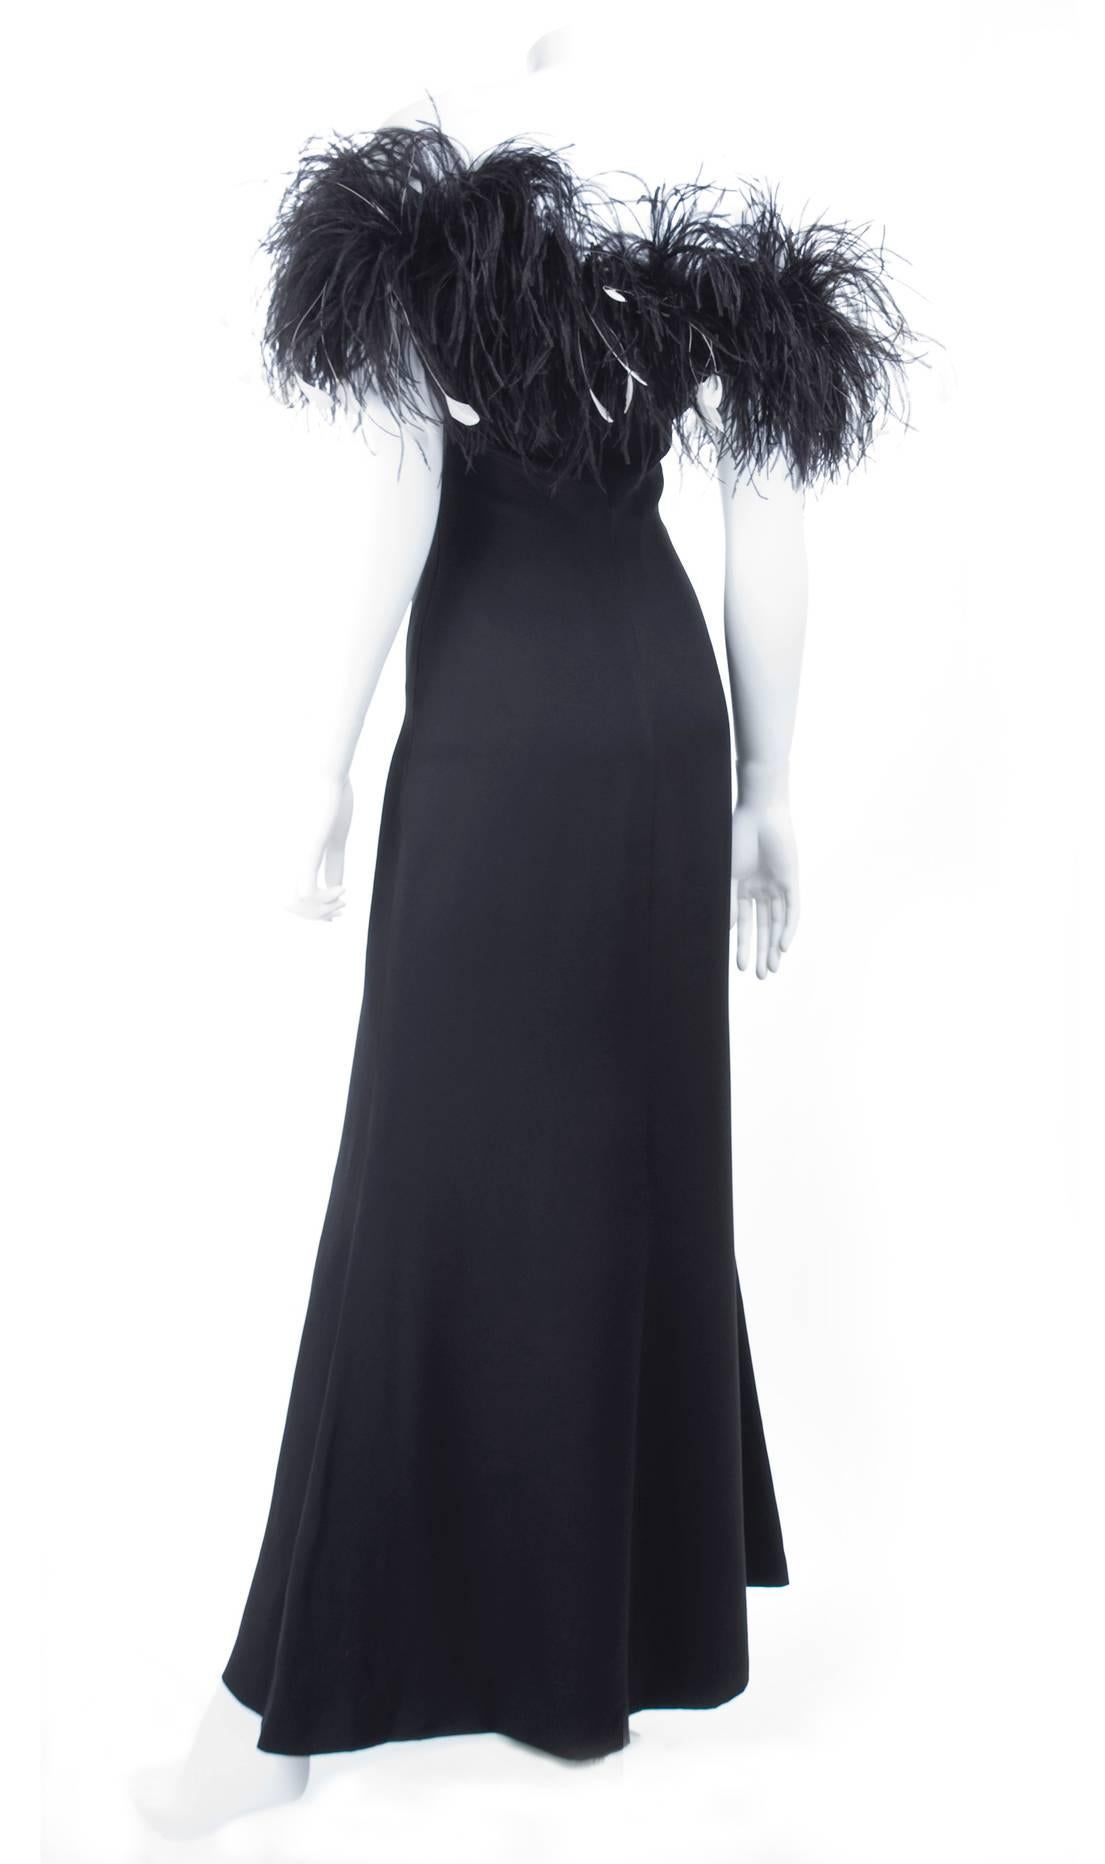 Women's Yves Saint Laurent Gown with Feathers